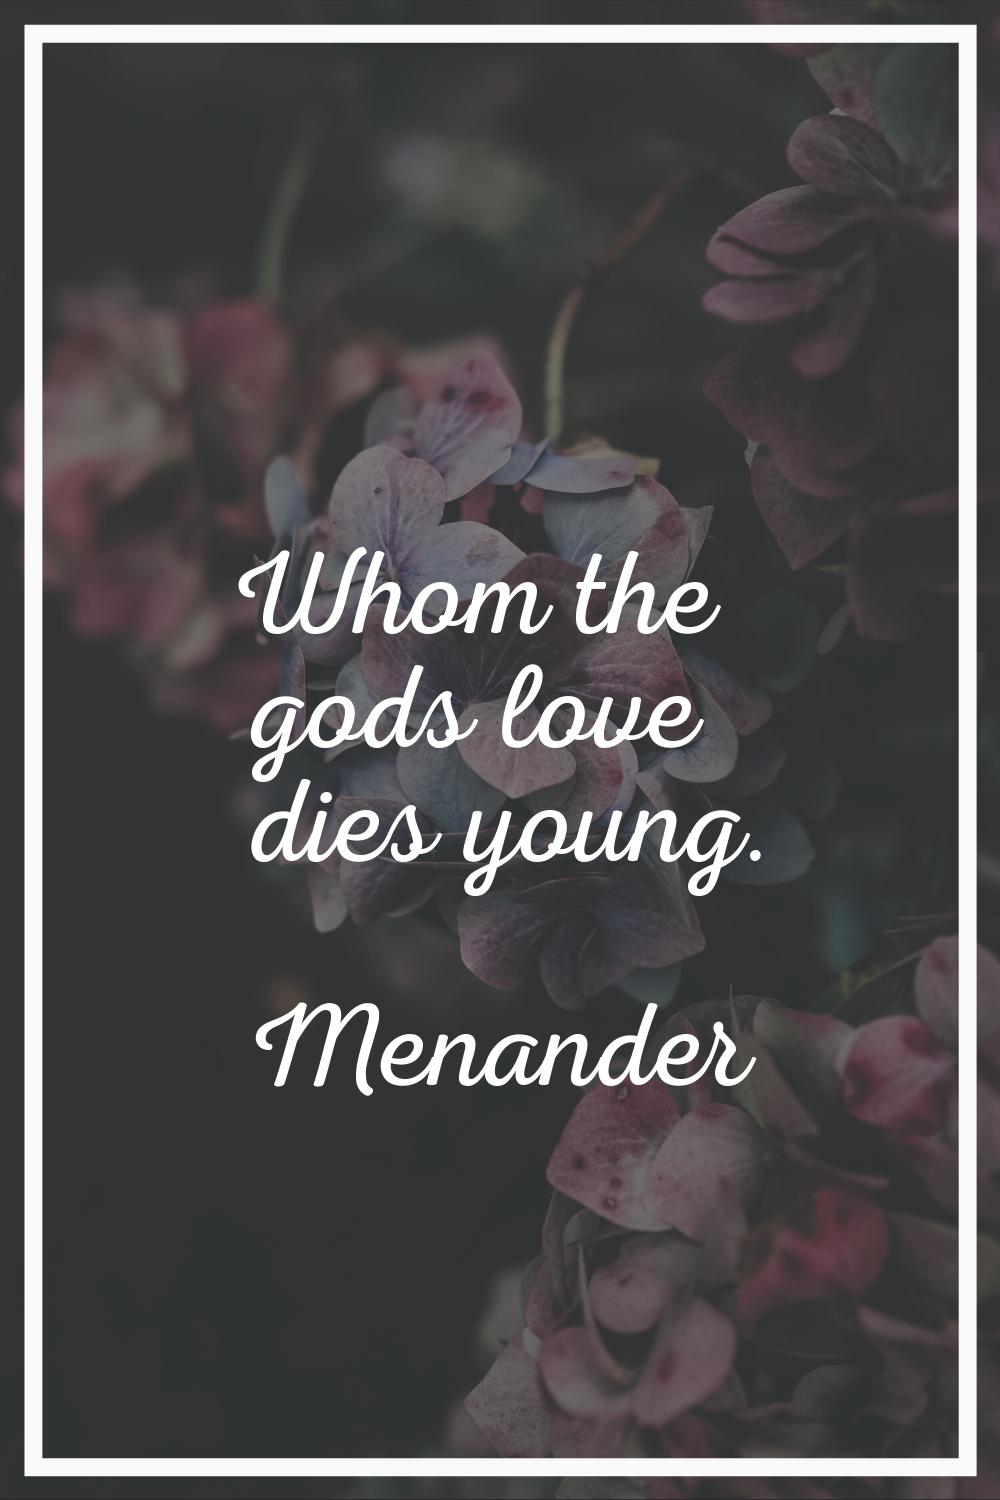 Whom the gods love dies young.